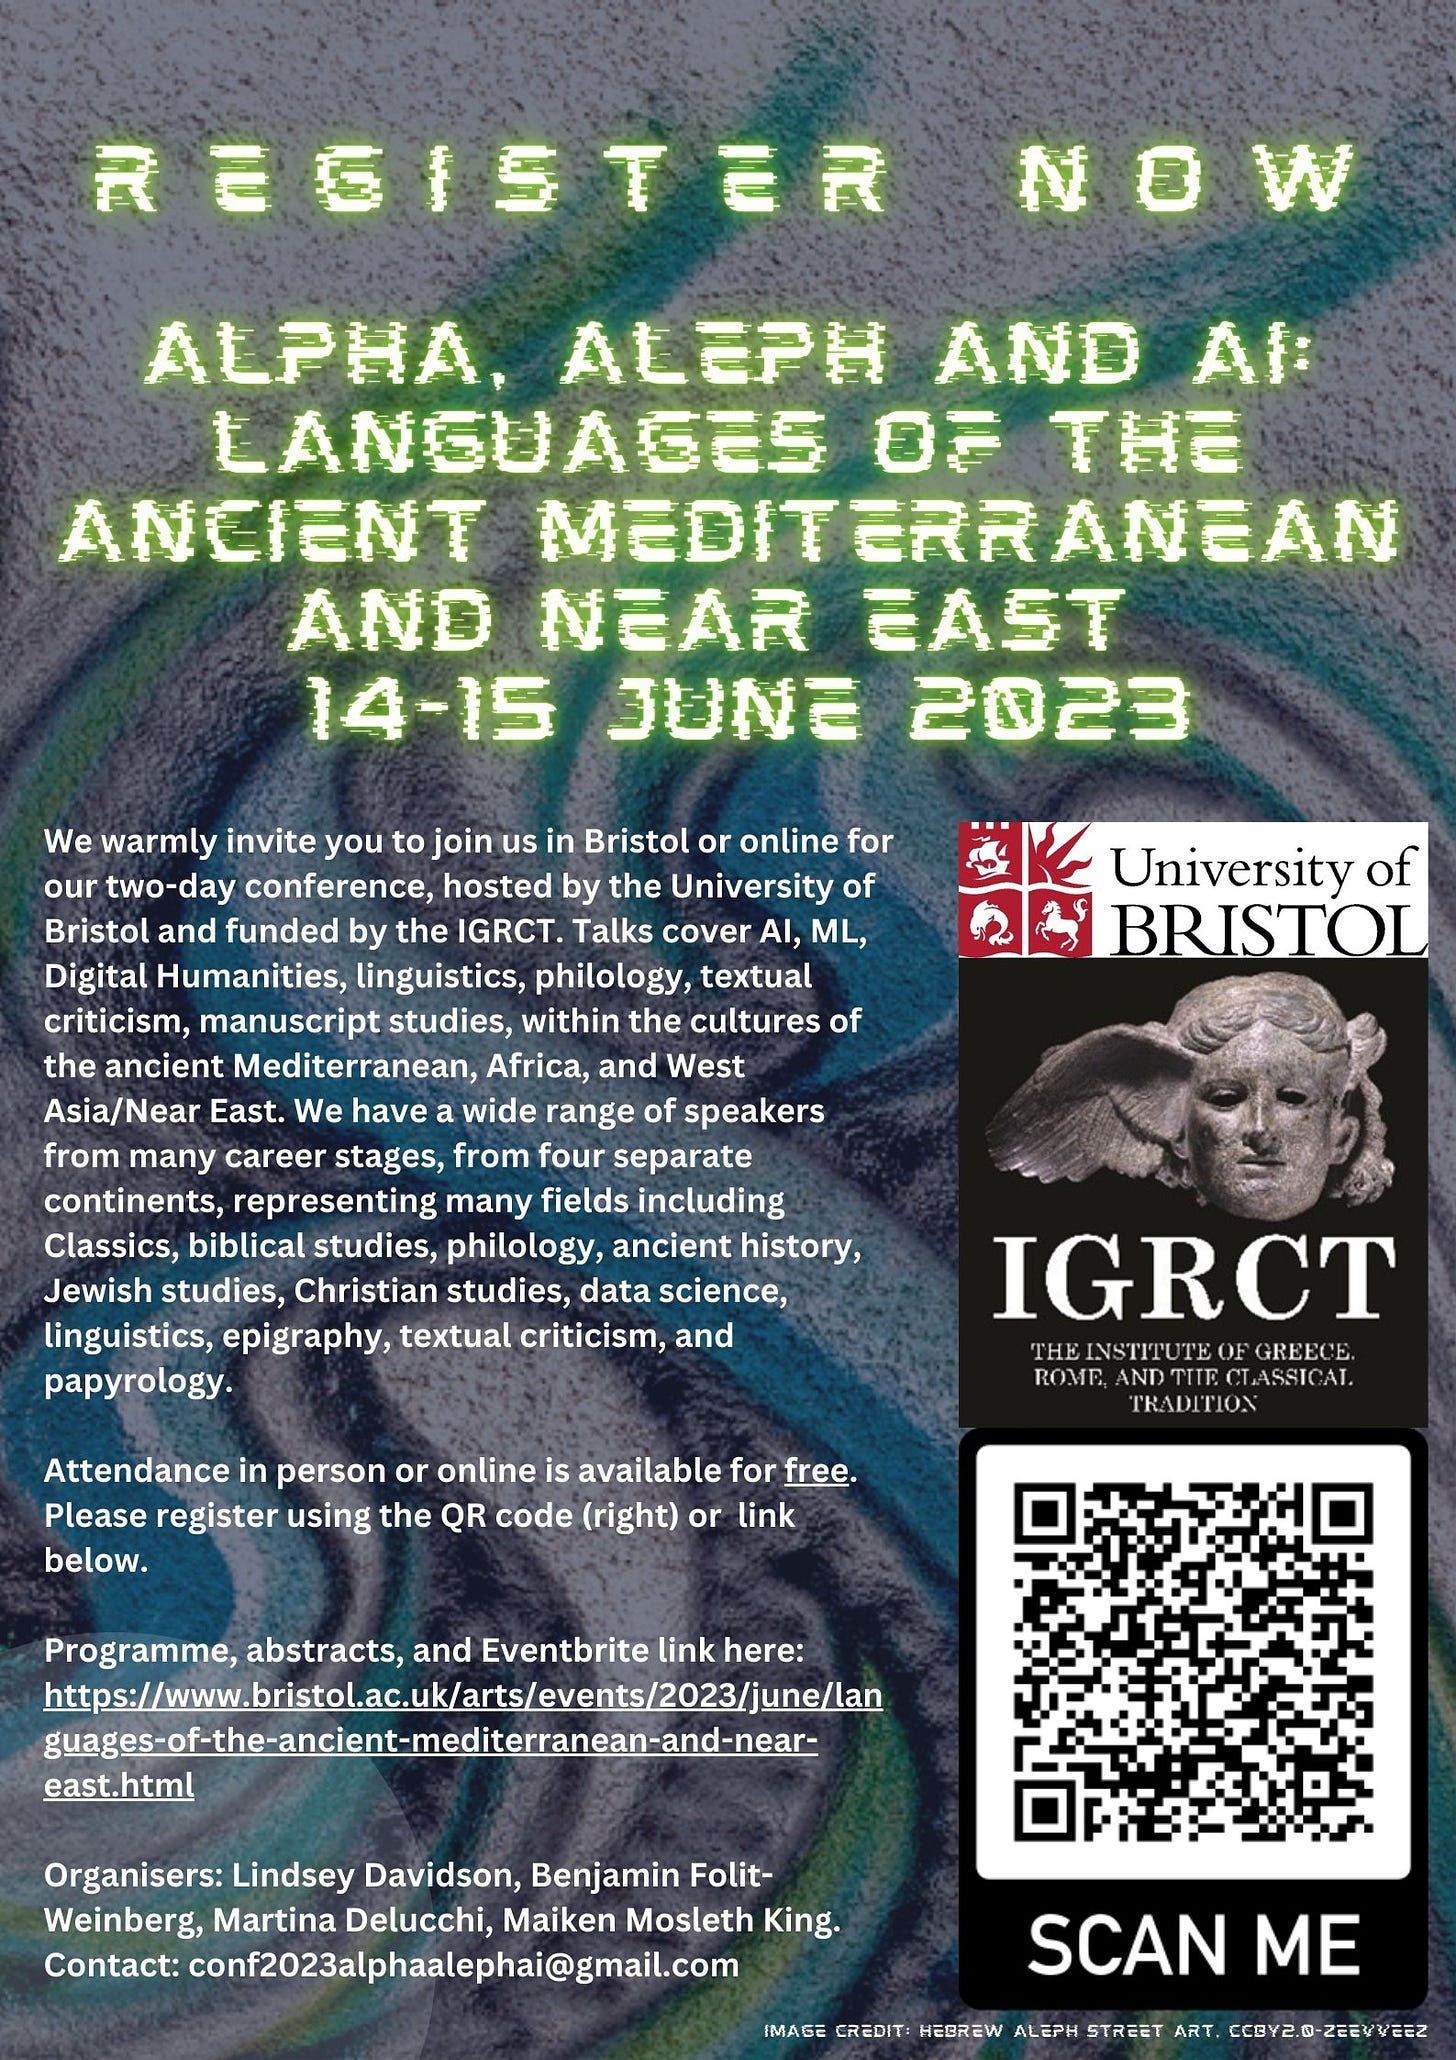 Alpha, Aleph, and AI: Languages of the Ancient Mediterranean and Near East